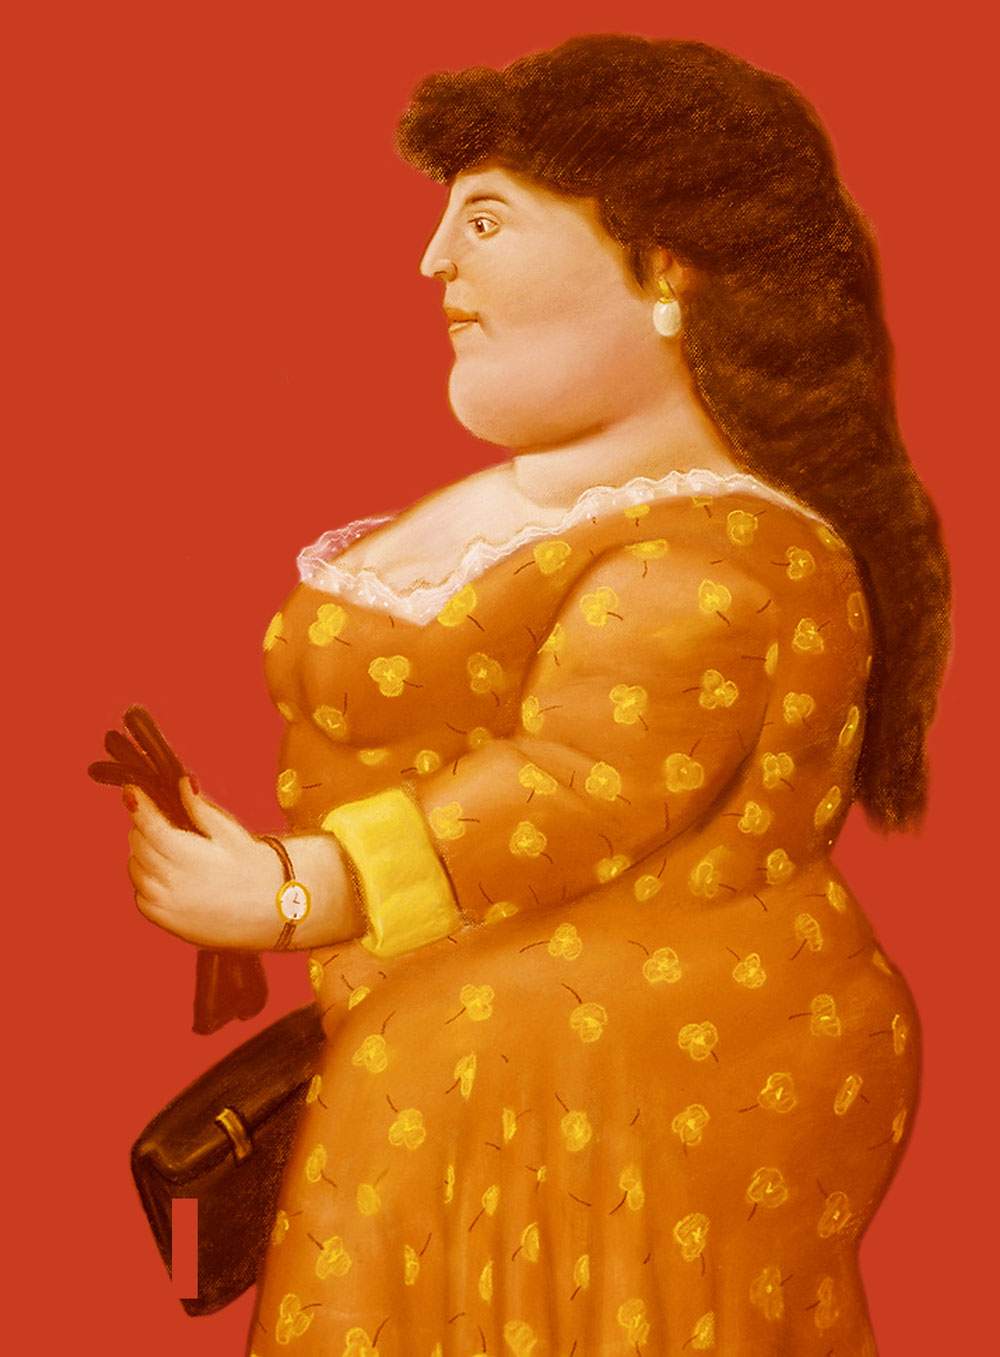 An exhibition dedicated to Botero is coming to Bologna